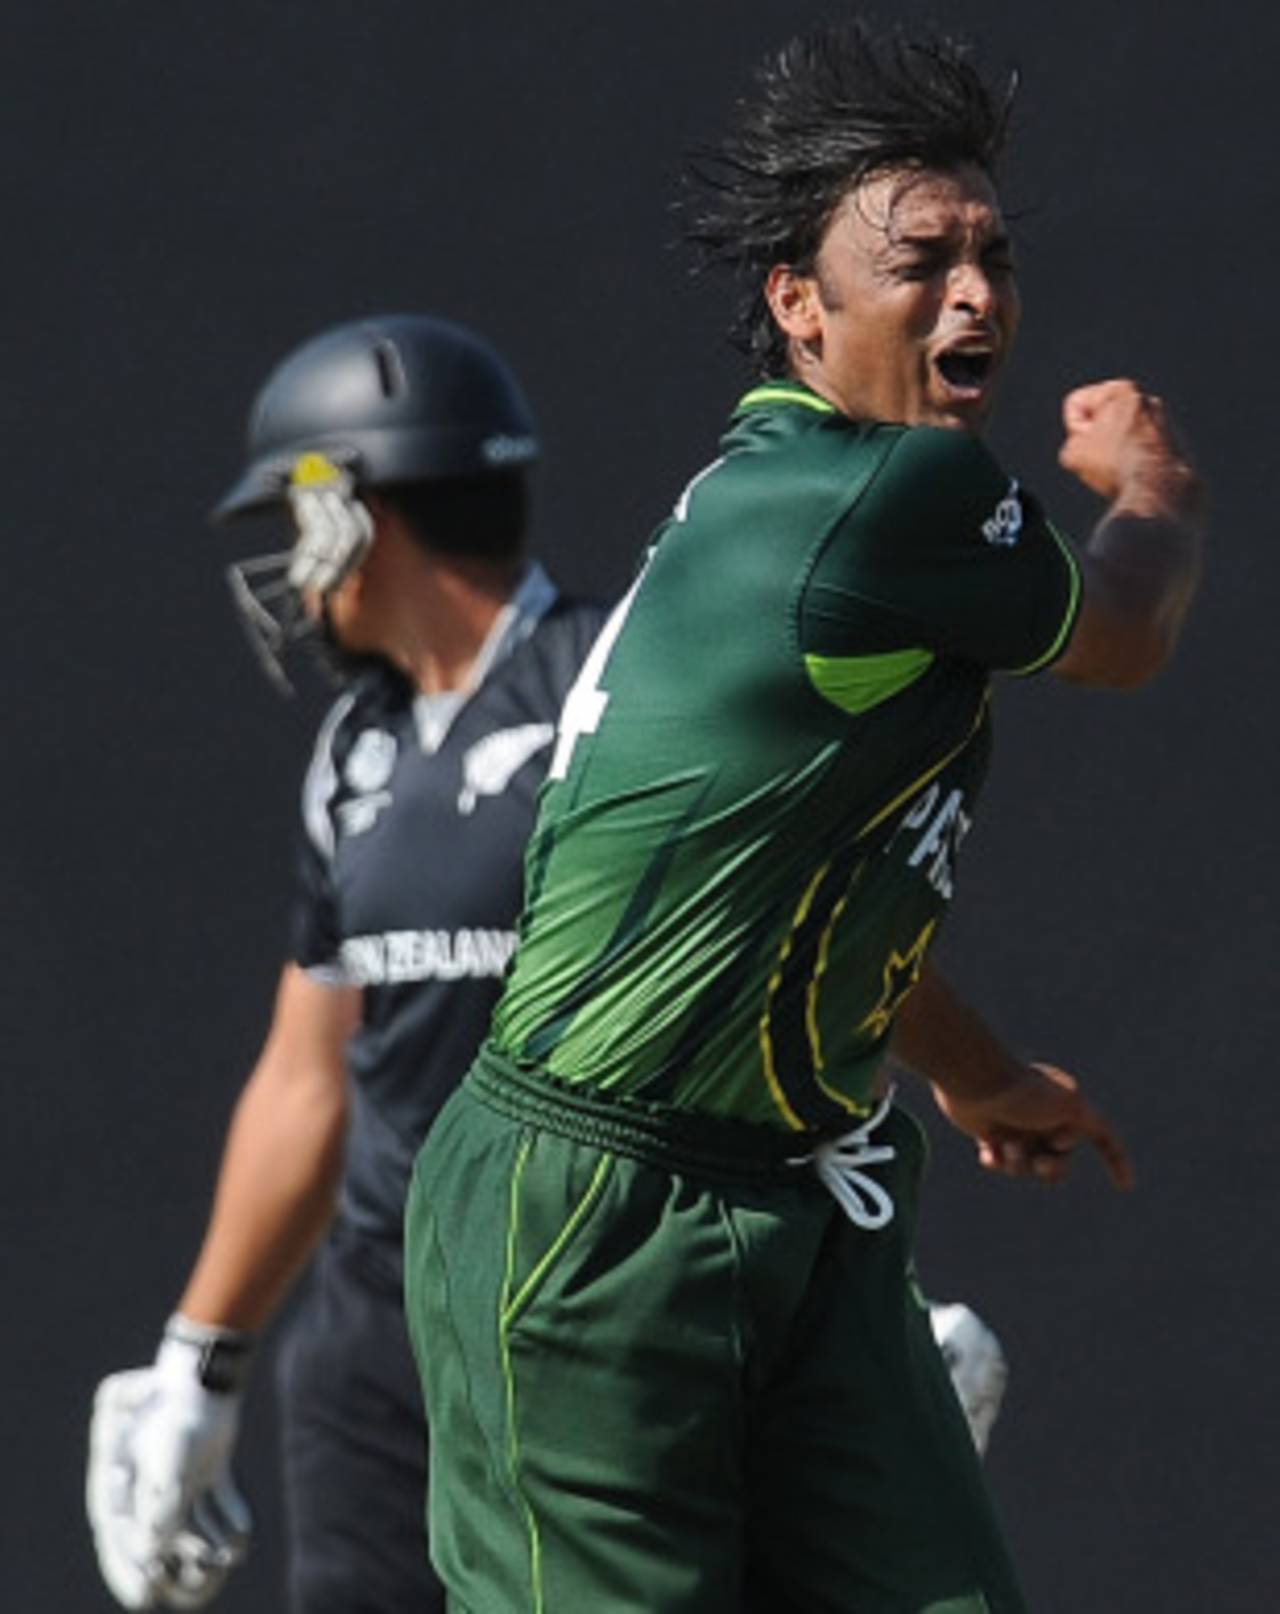 Shoaib Akhtar erupts after Kamran Akmal dropped Ross Taylor behind the stumps, New Zealand v Pakistan, Group A, World Cup, Pallekele, March 8, 2011